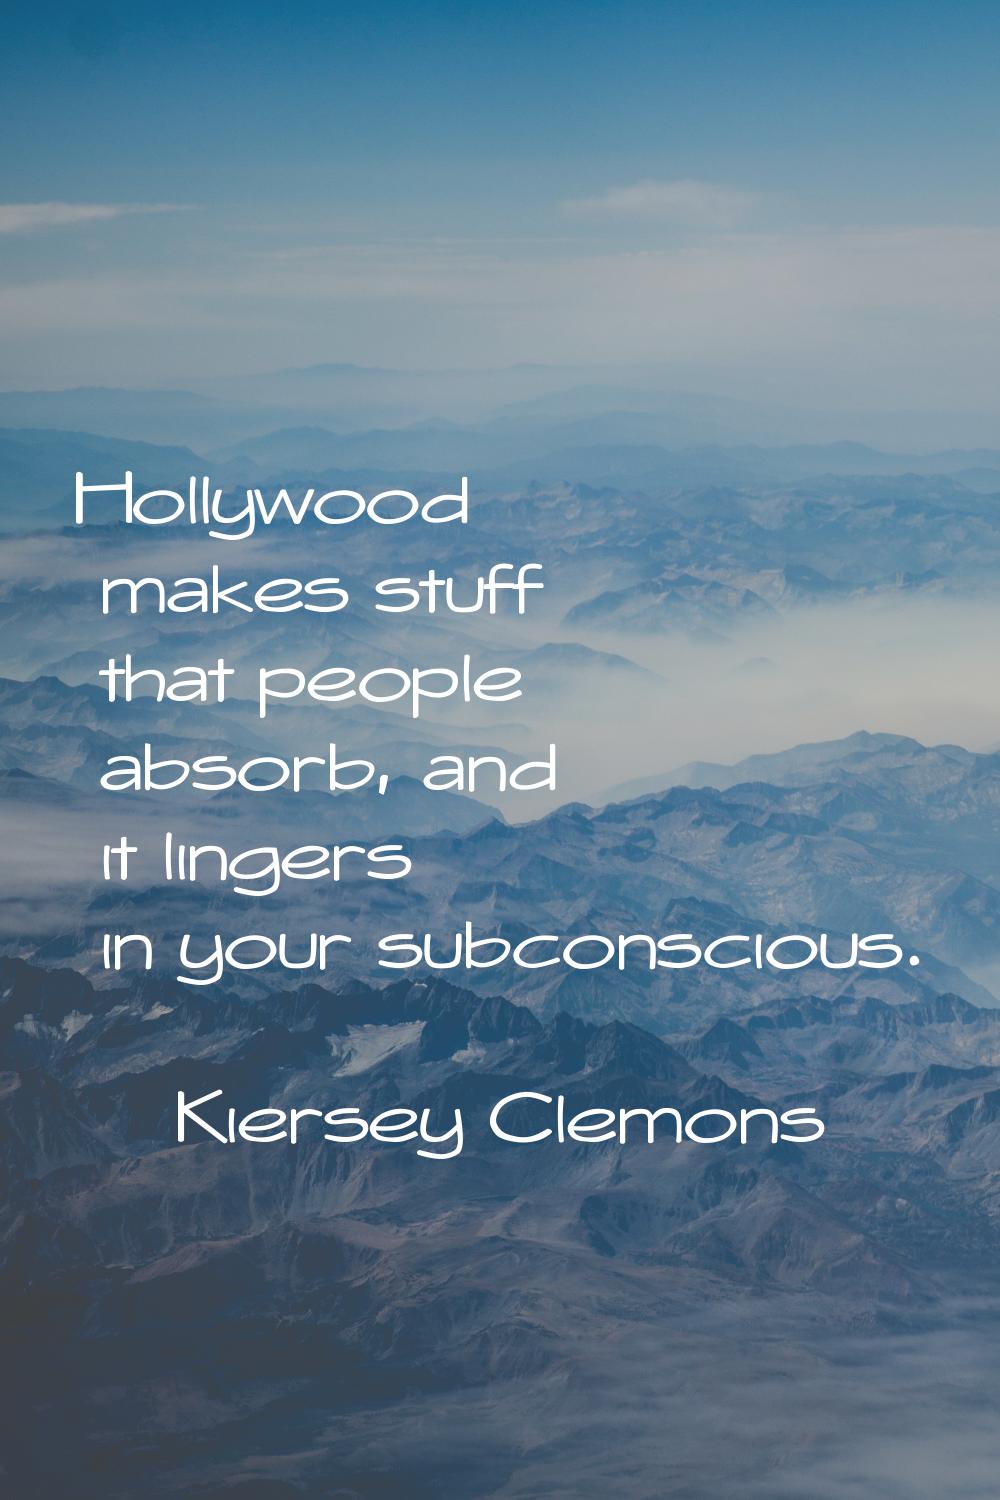 Hollywood makes stuff that people absorb, and it lingers in your subconscious.